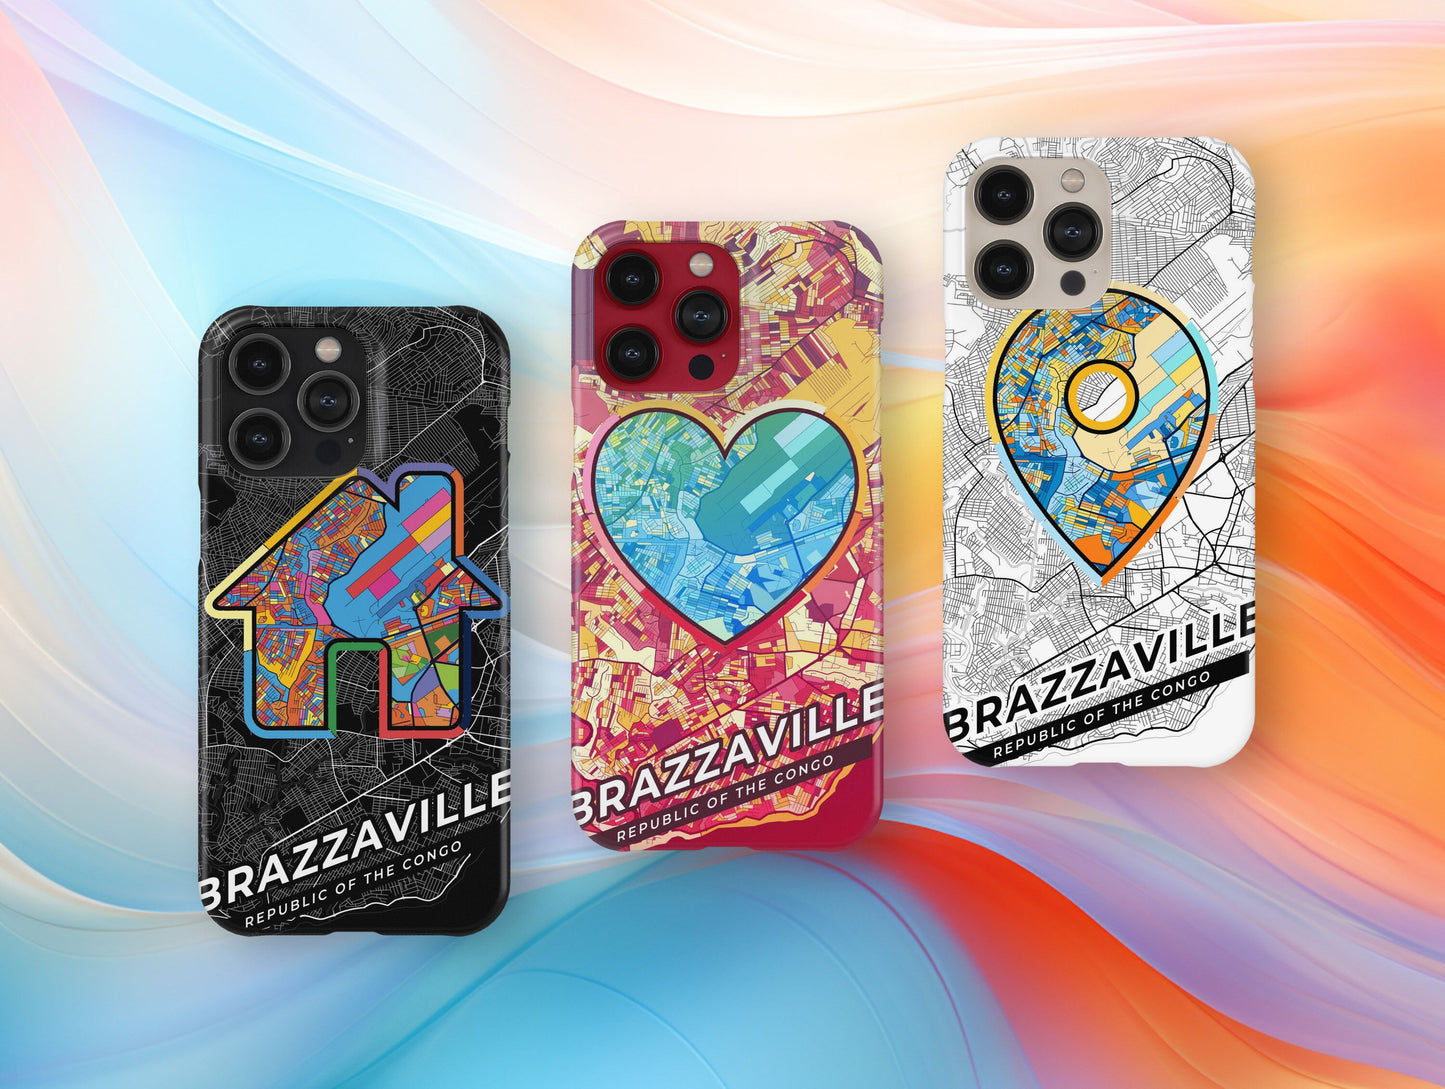 Brazzaville Republic Of The Congo slim phone case with colorful icon. Birthday, wedding or housewarming gift. Couple match cases.